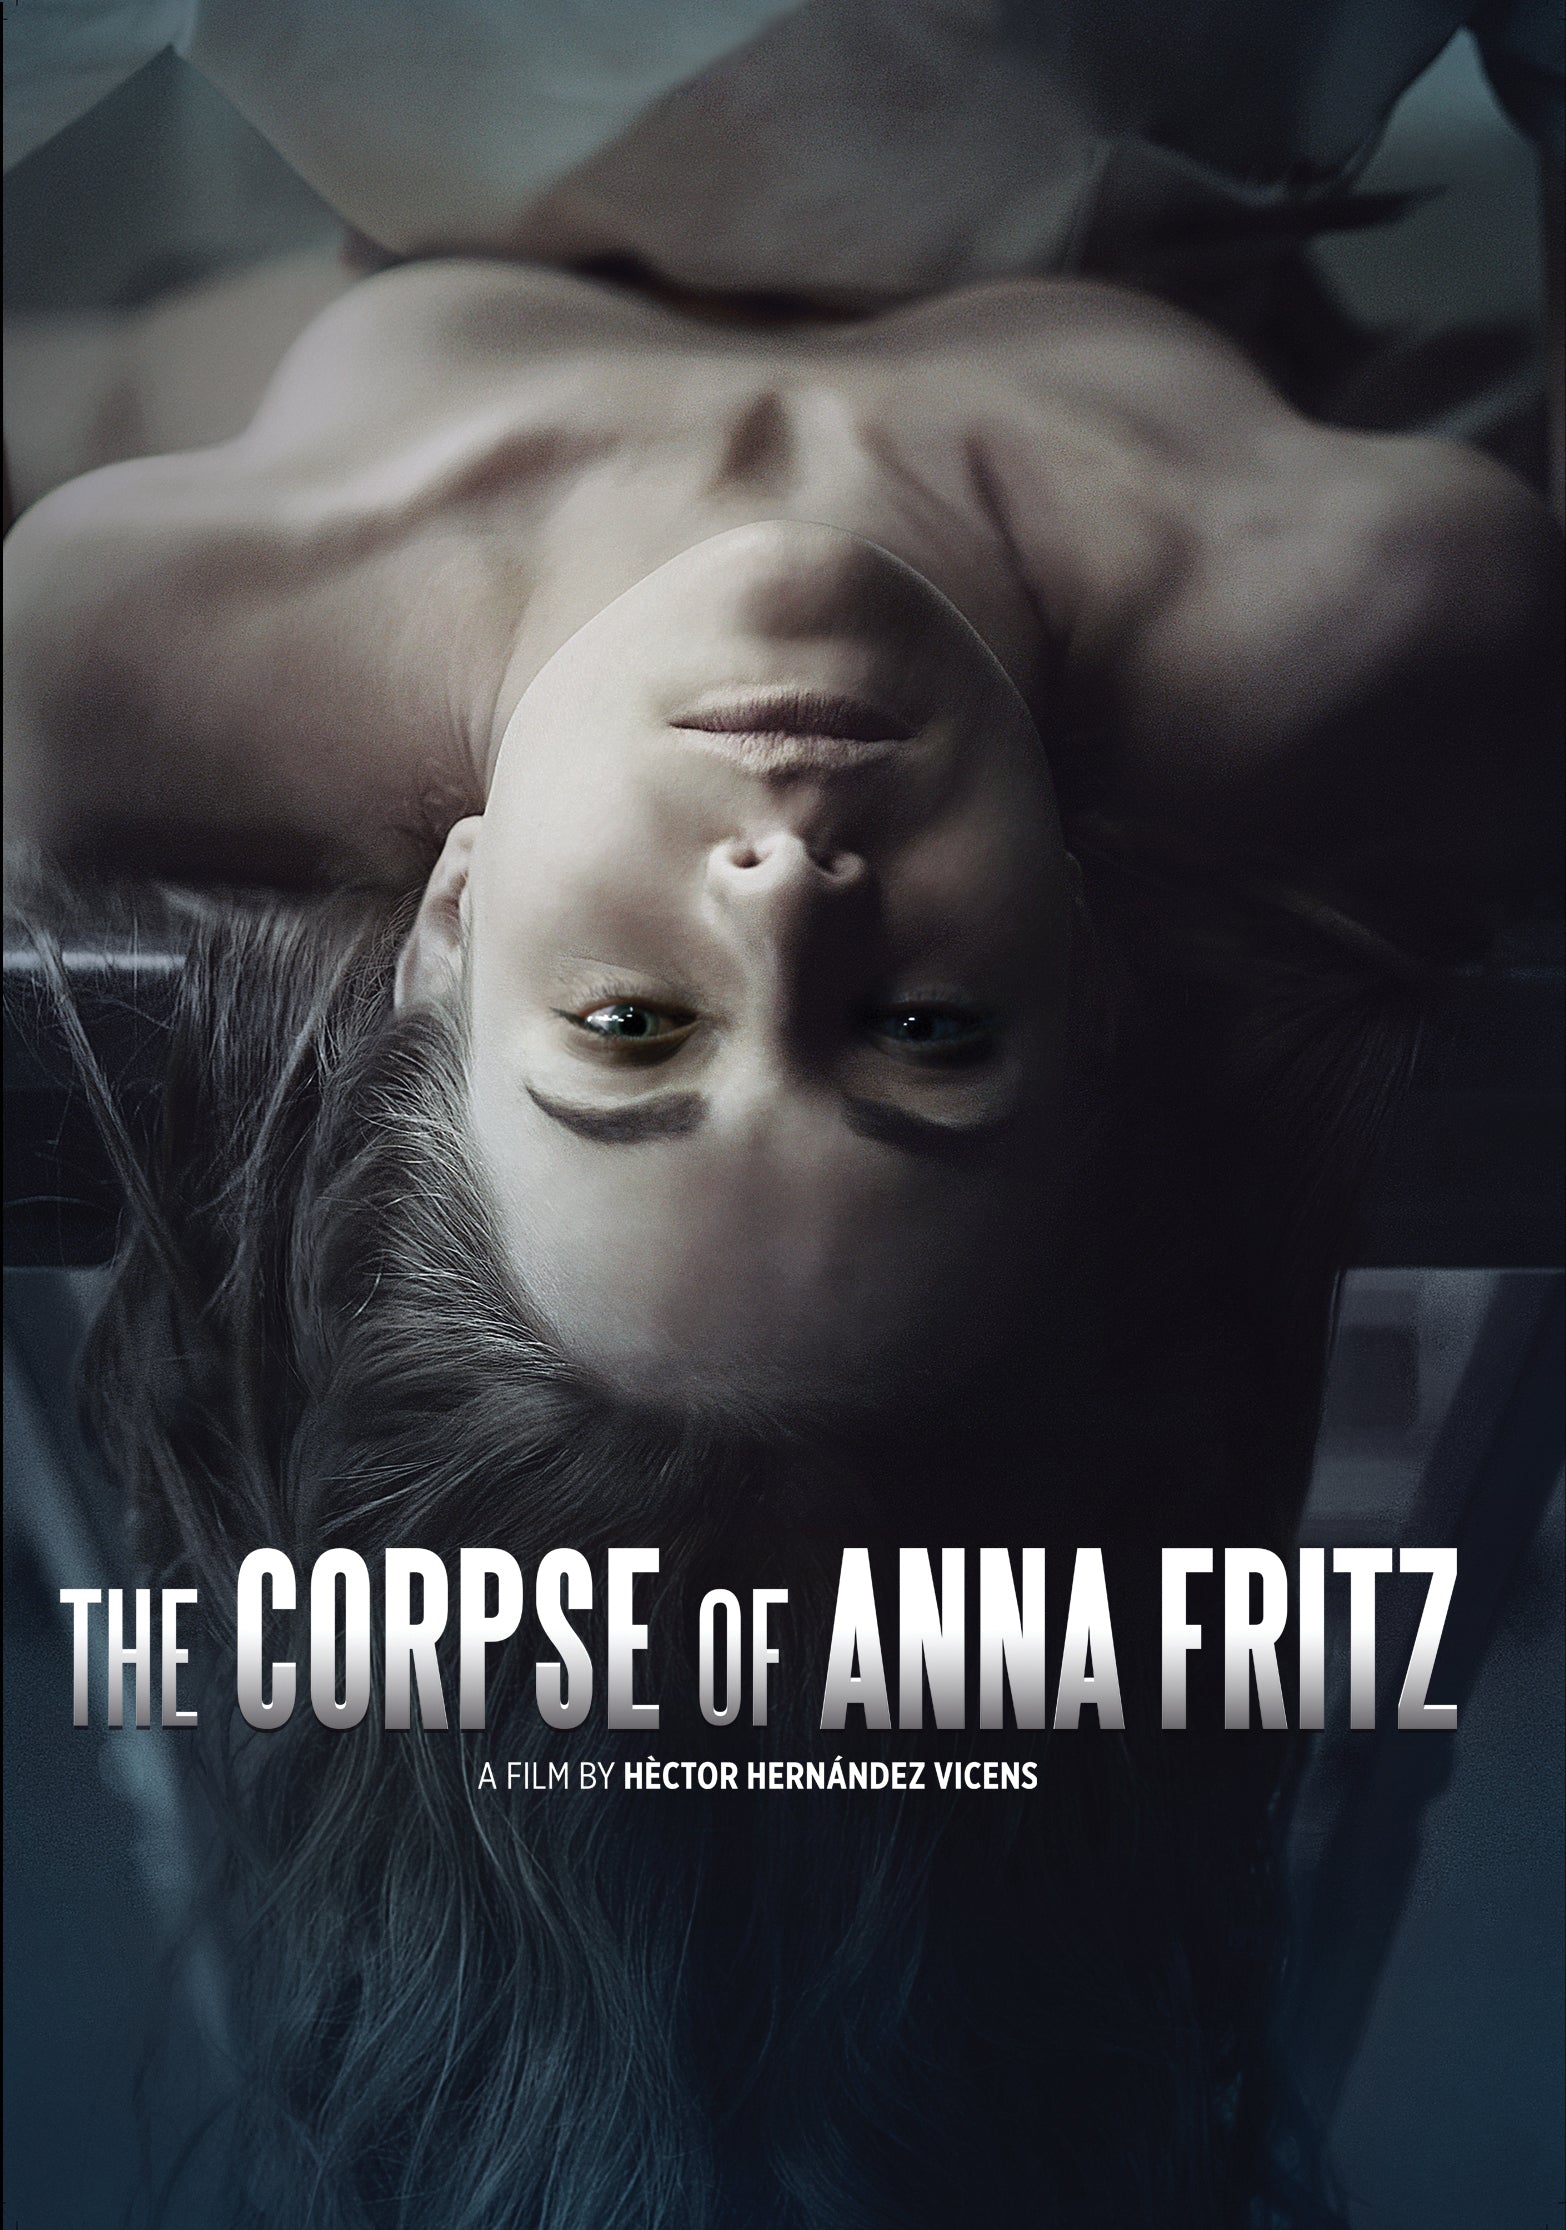 THE CORPSE OF ANNA FRITZ DVD